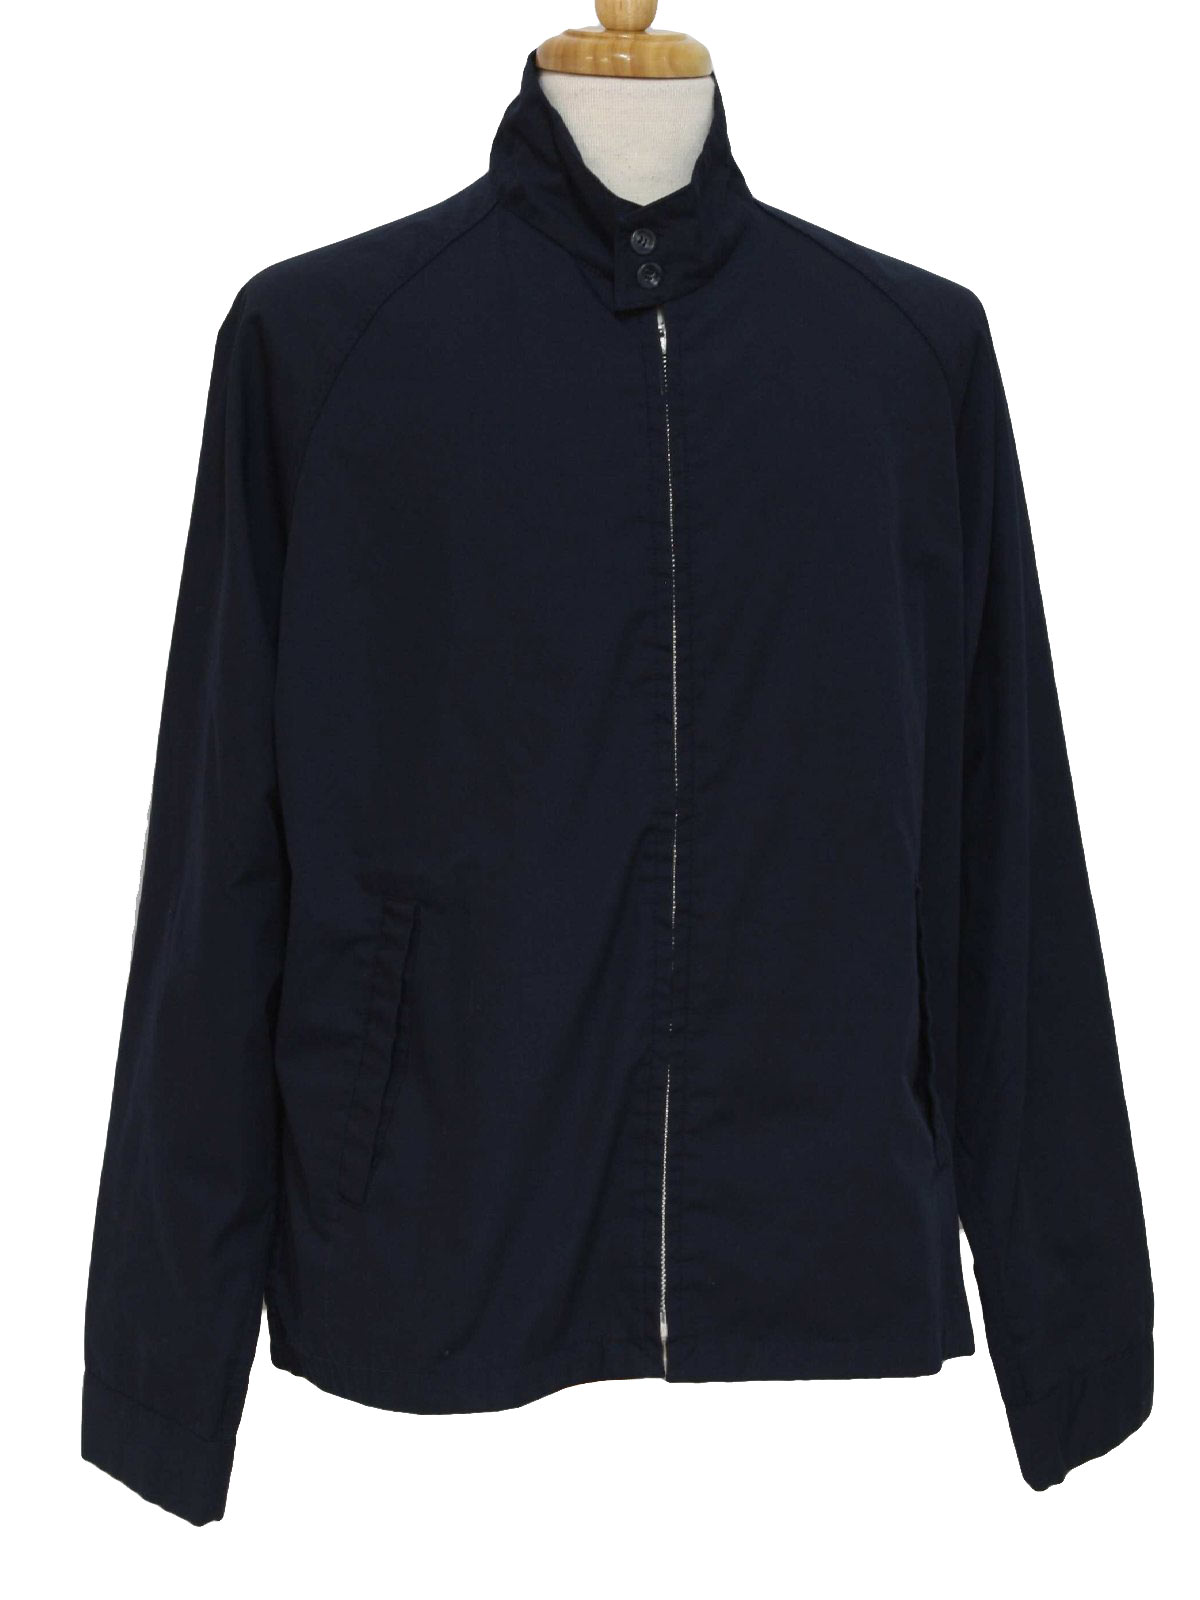 Retro 60's Jacket: Late 60s or early 70s -Sir Jac- Mens navy blue ...